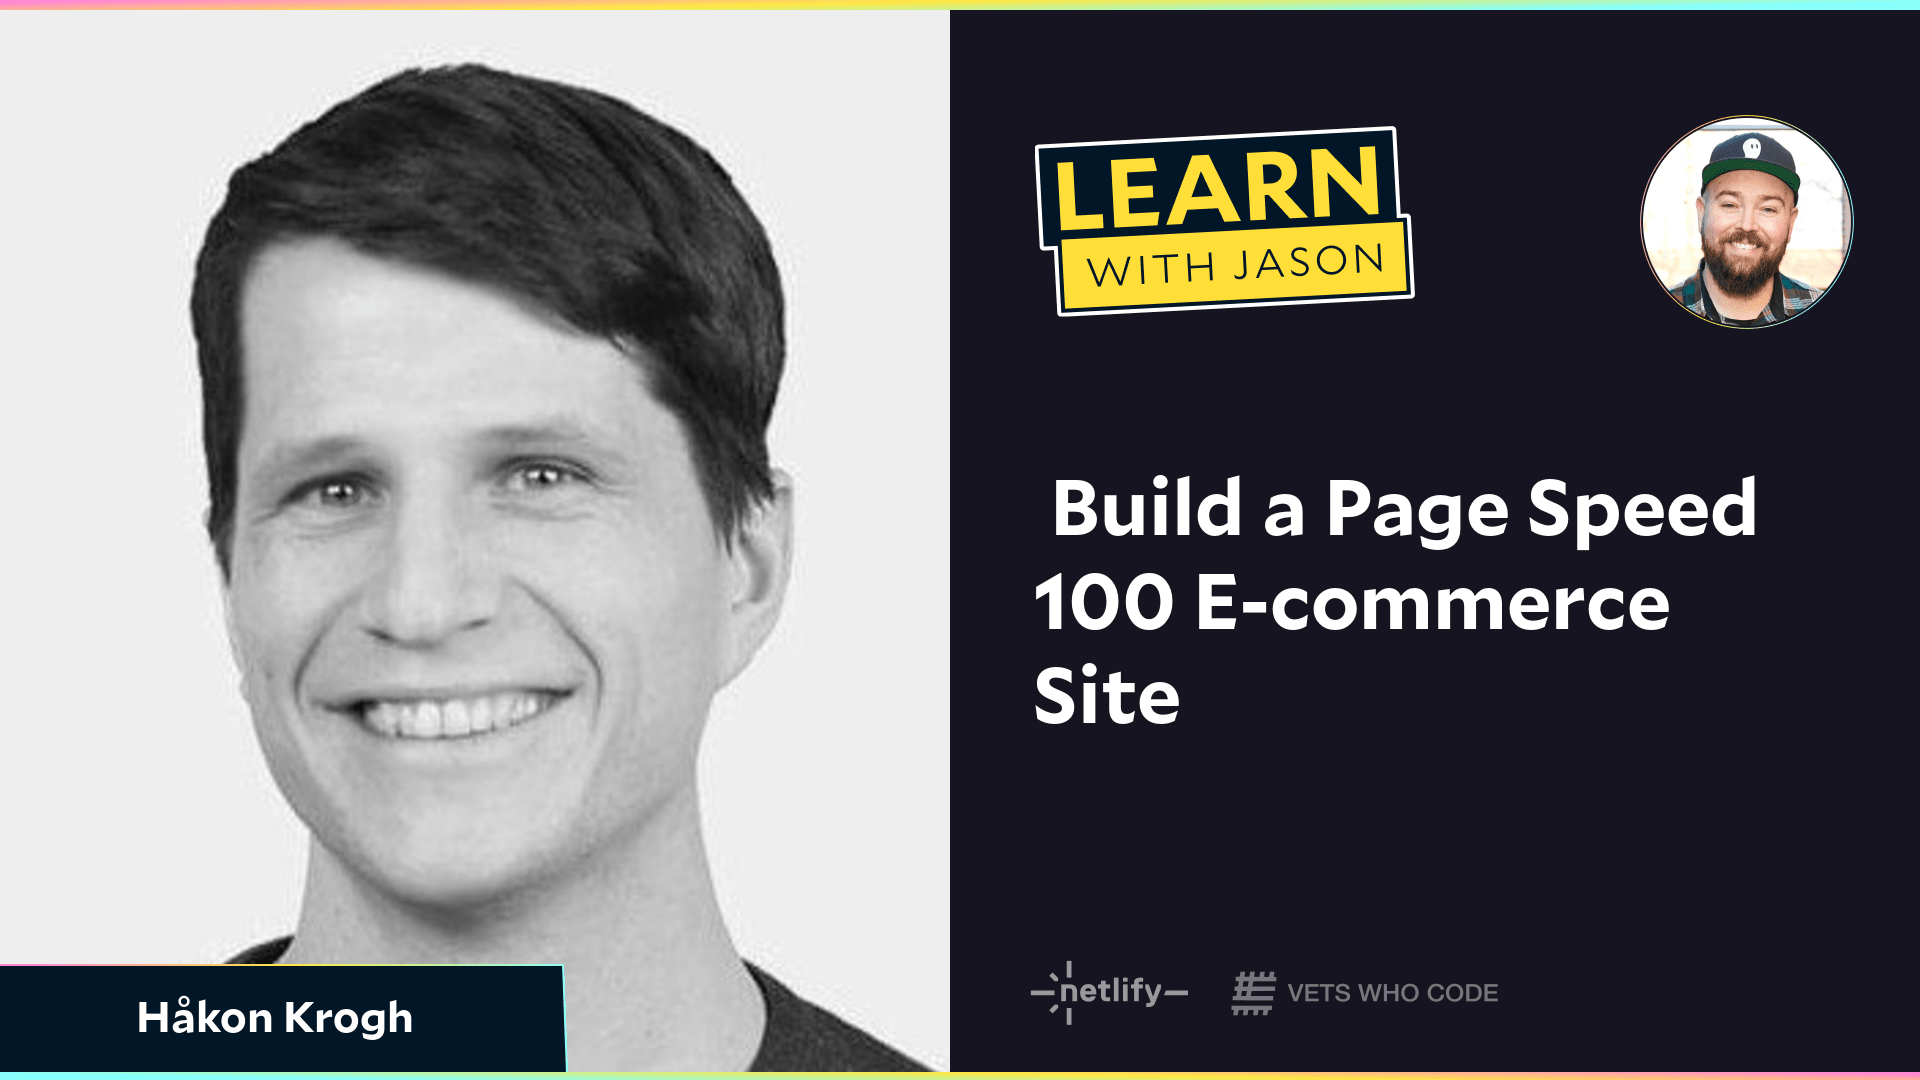  Build a Page Speed 100 E-commerce Site (with Håkon Krogh)